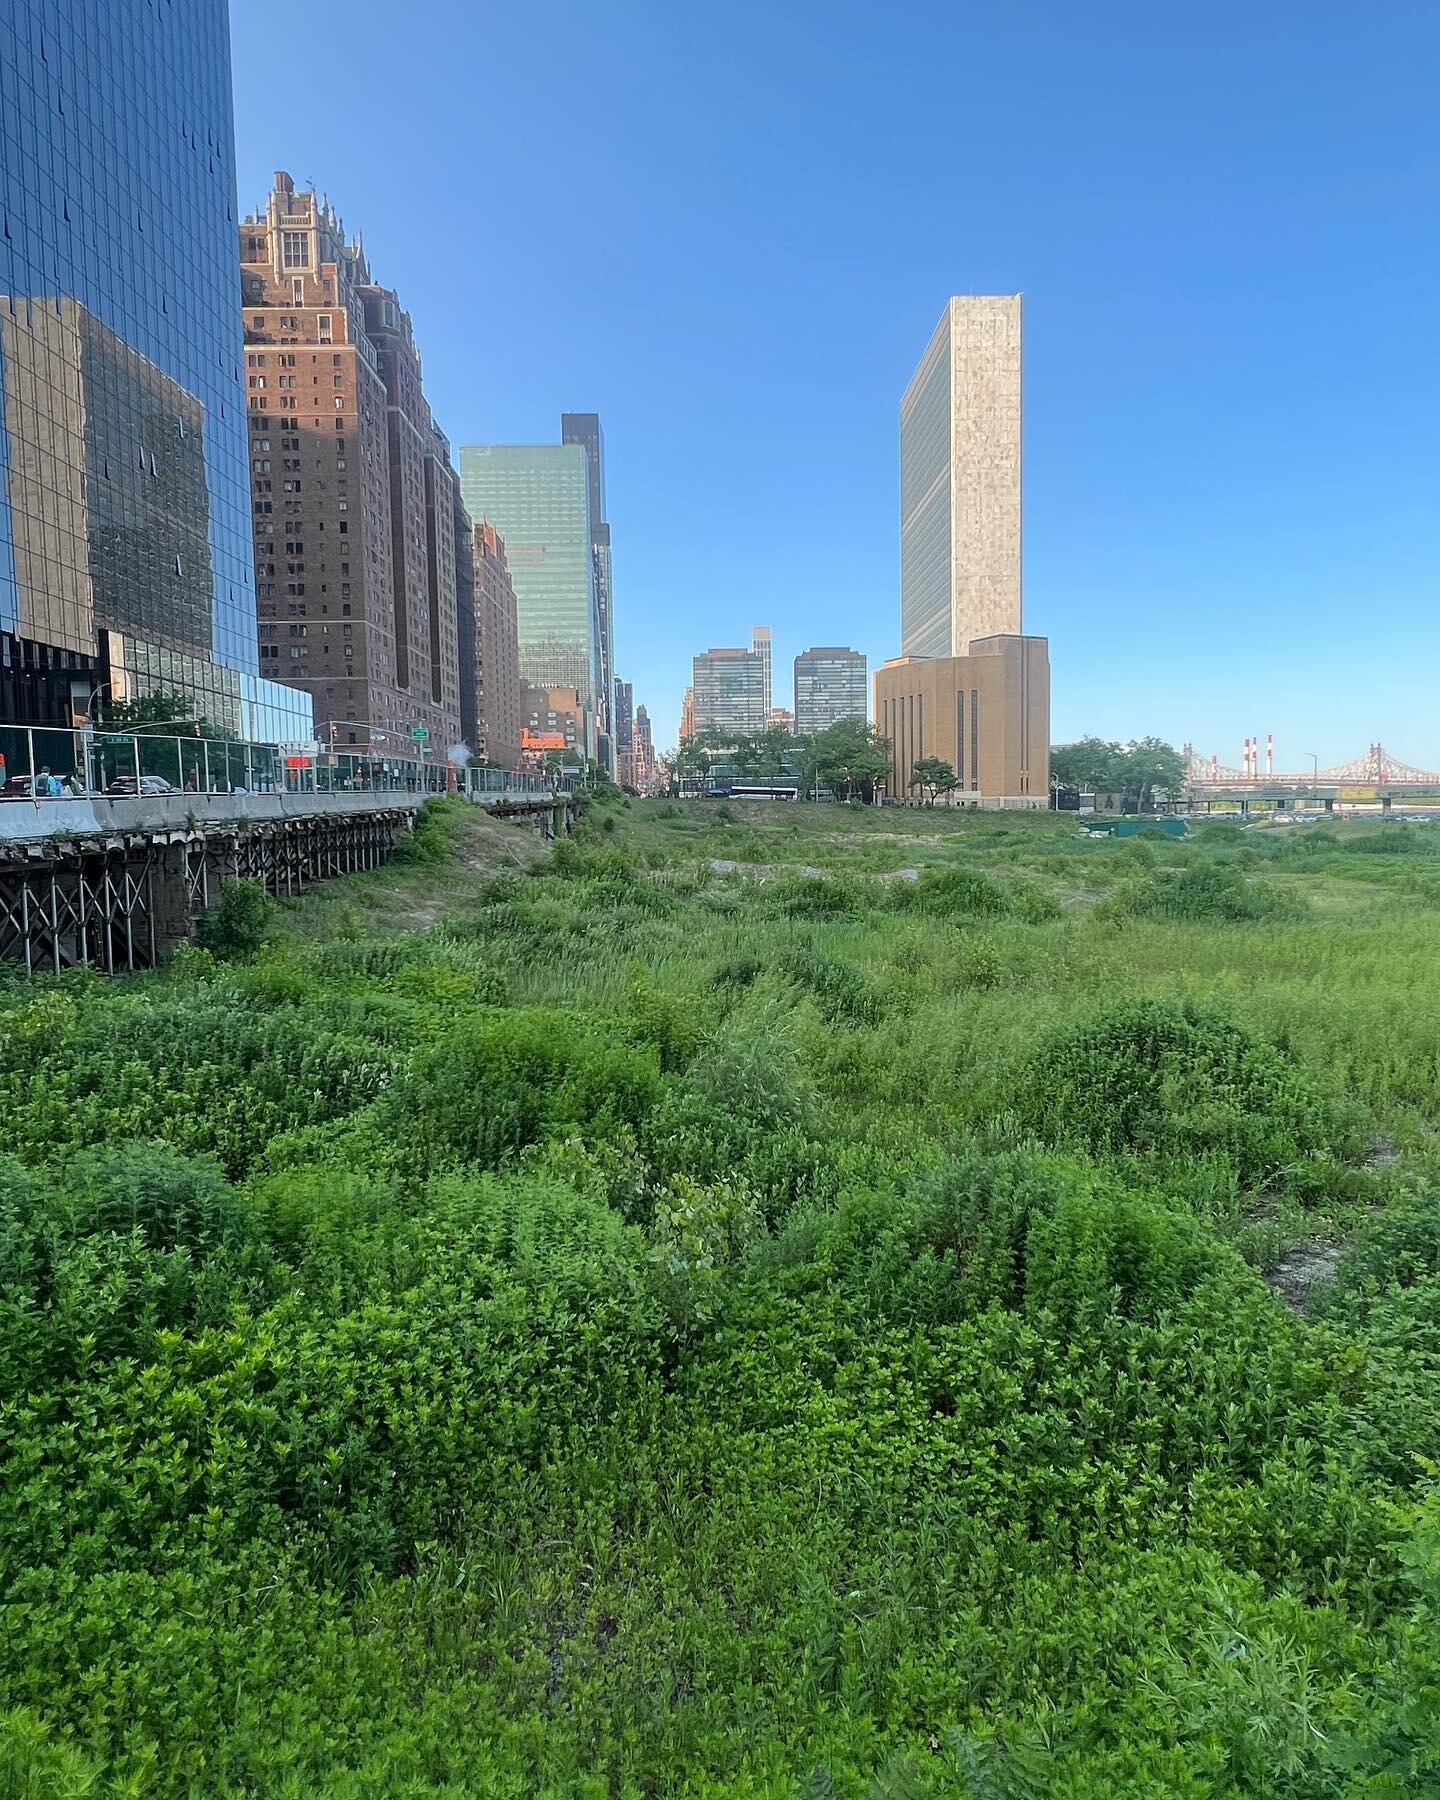 The largest plot of undeveloped land in #manhattan. 40th St on First Ave.

#nyc  #newyorkcity #newyork
#naturephotography #nature #newyorkphotographer #newyorkphotography